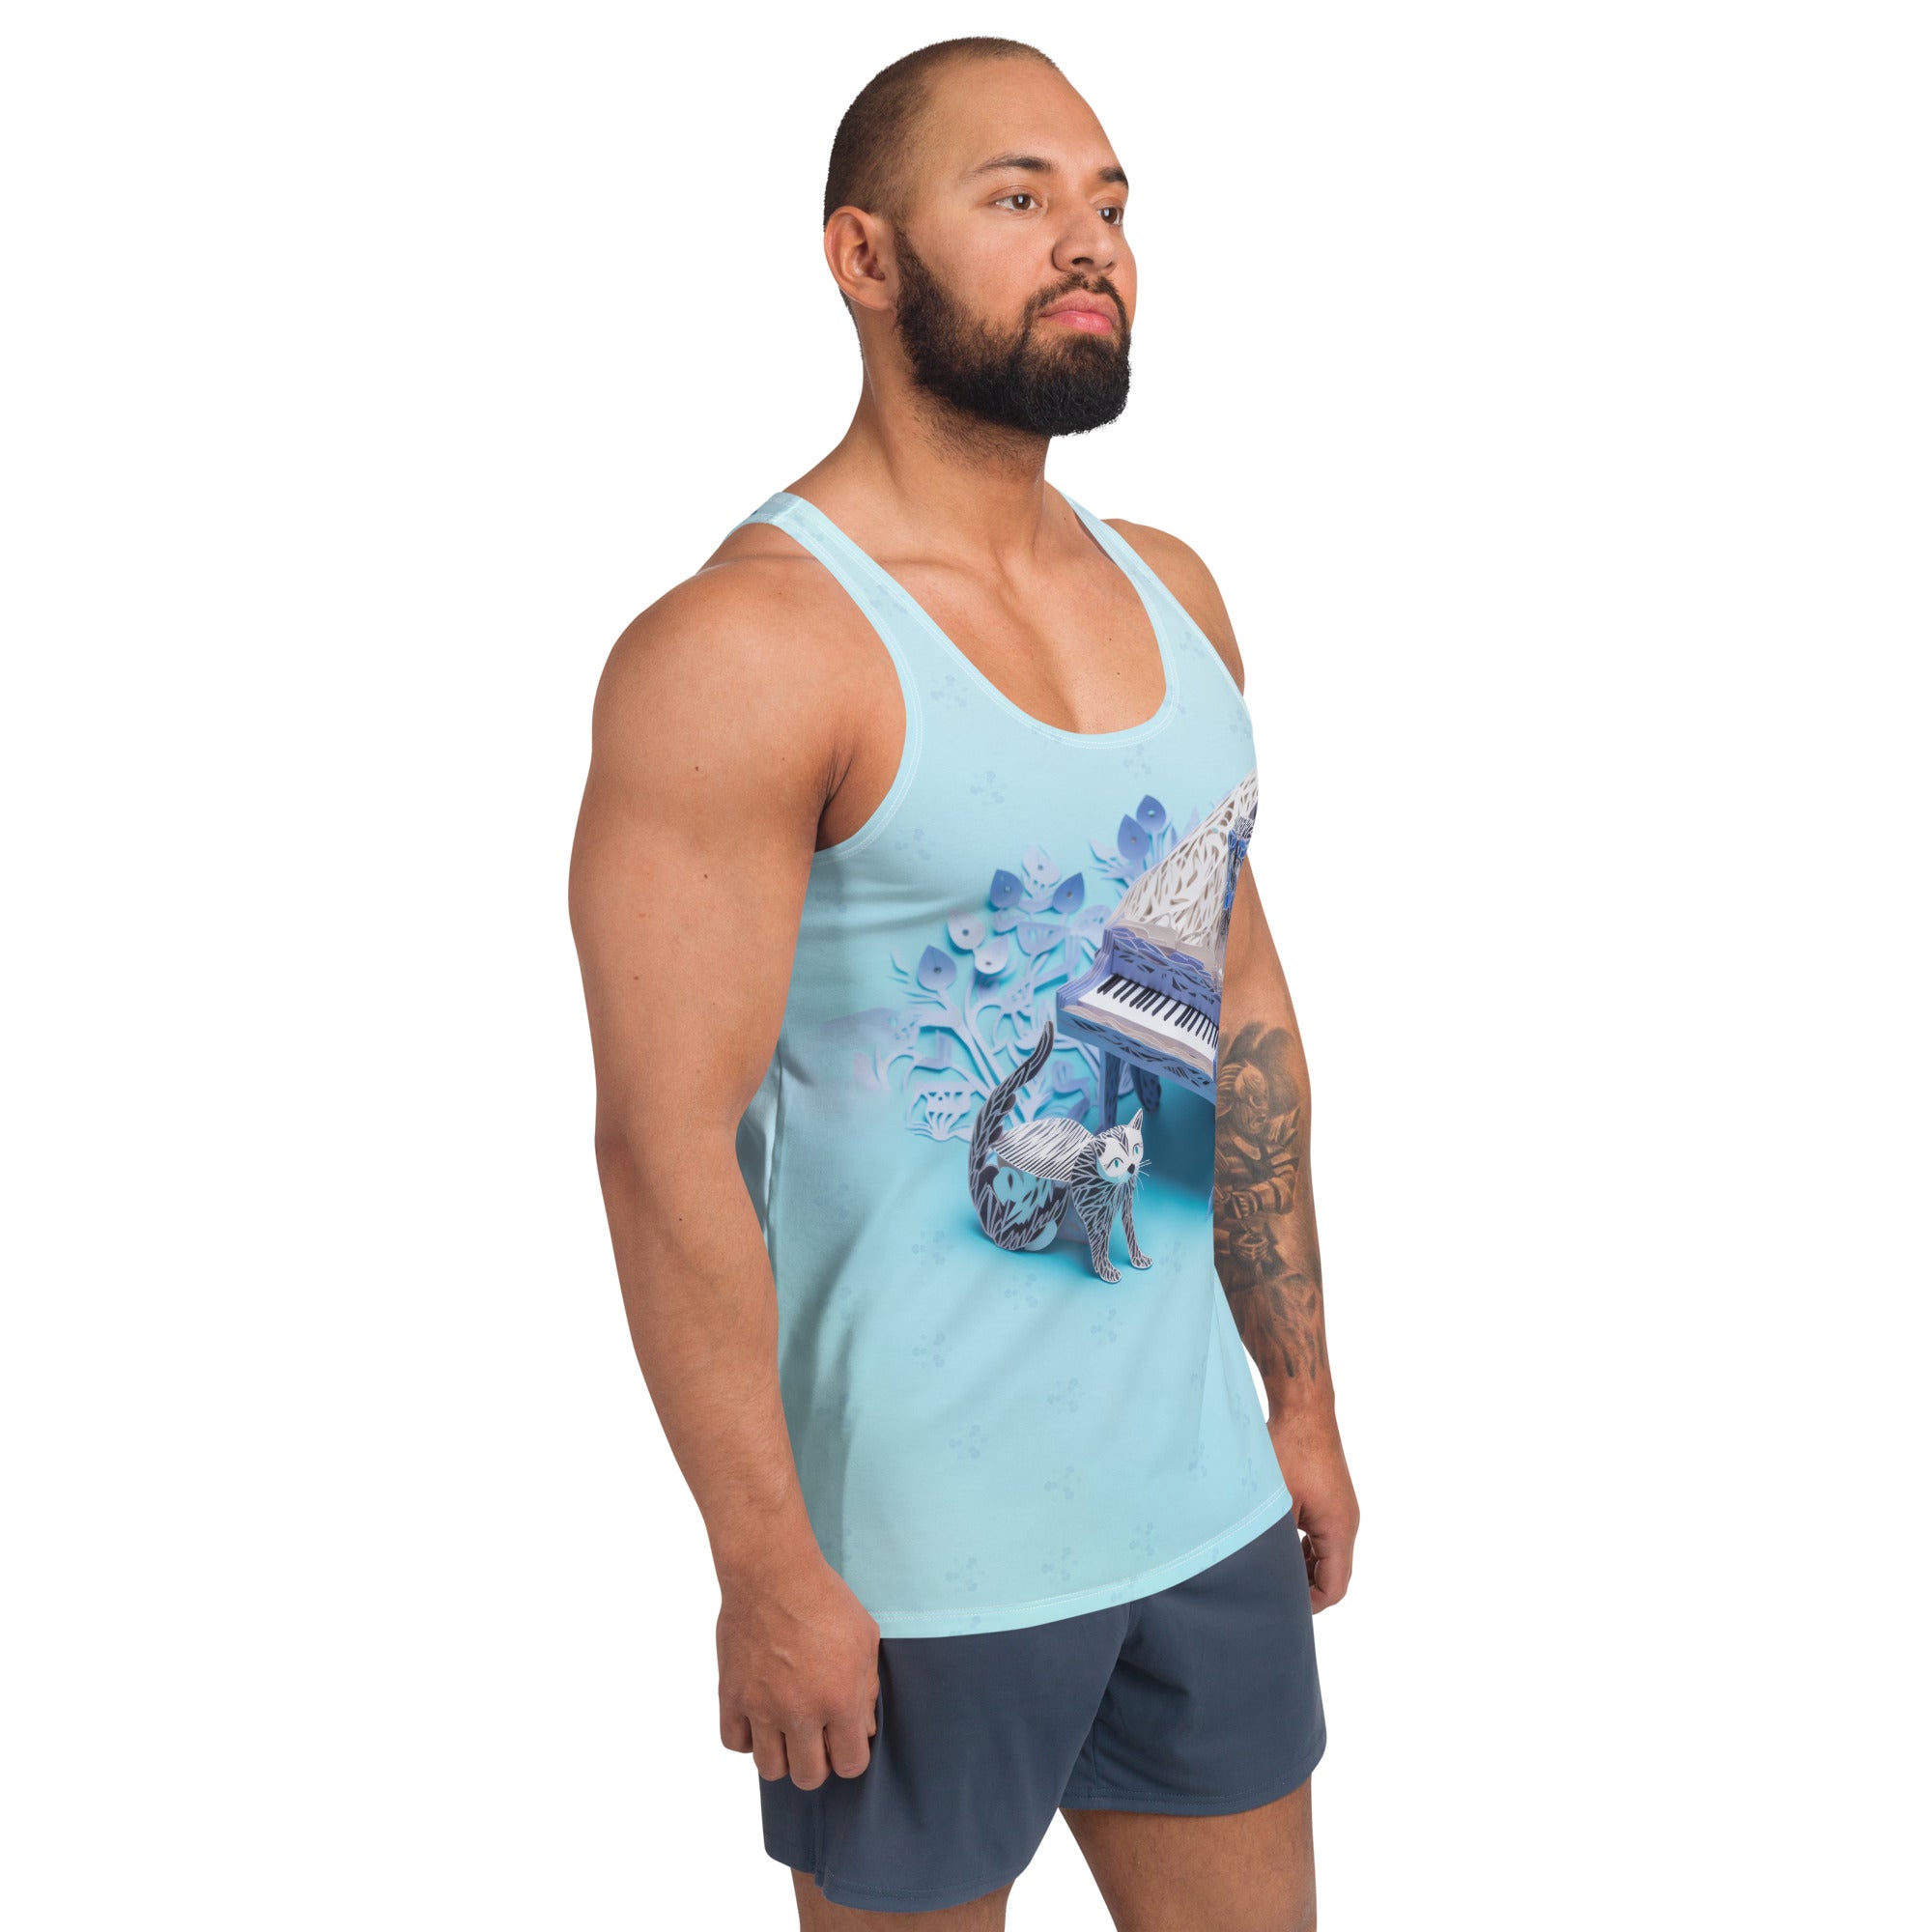 Casual men's tank top with Paper Dragon Myth print.